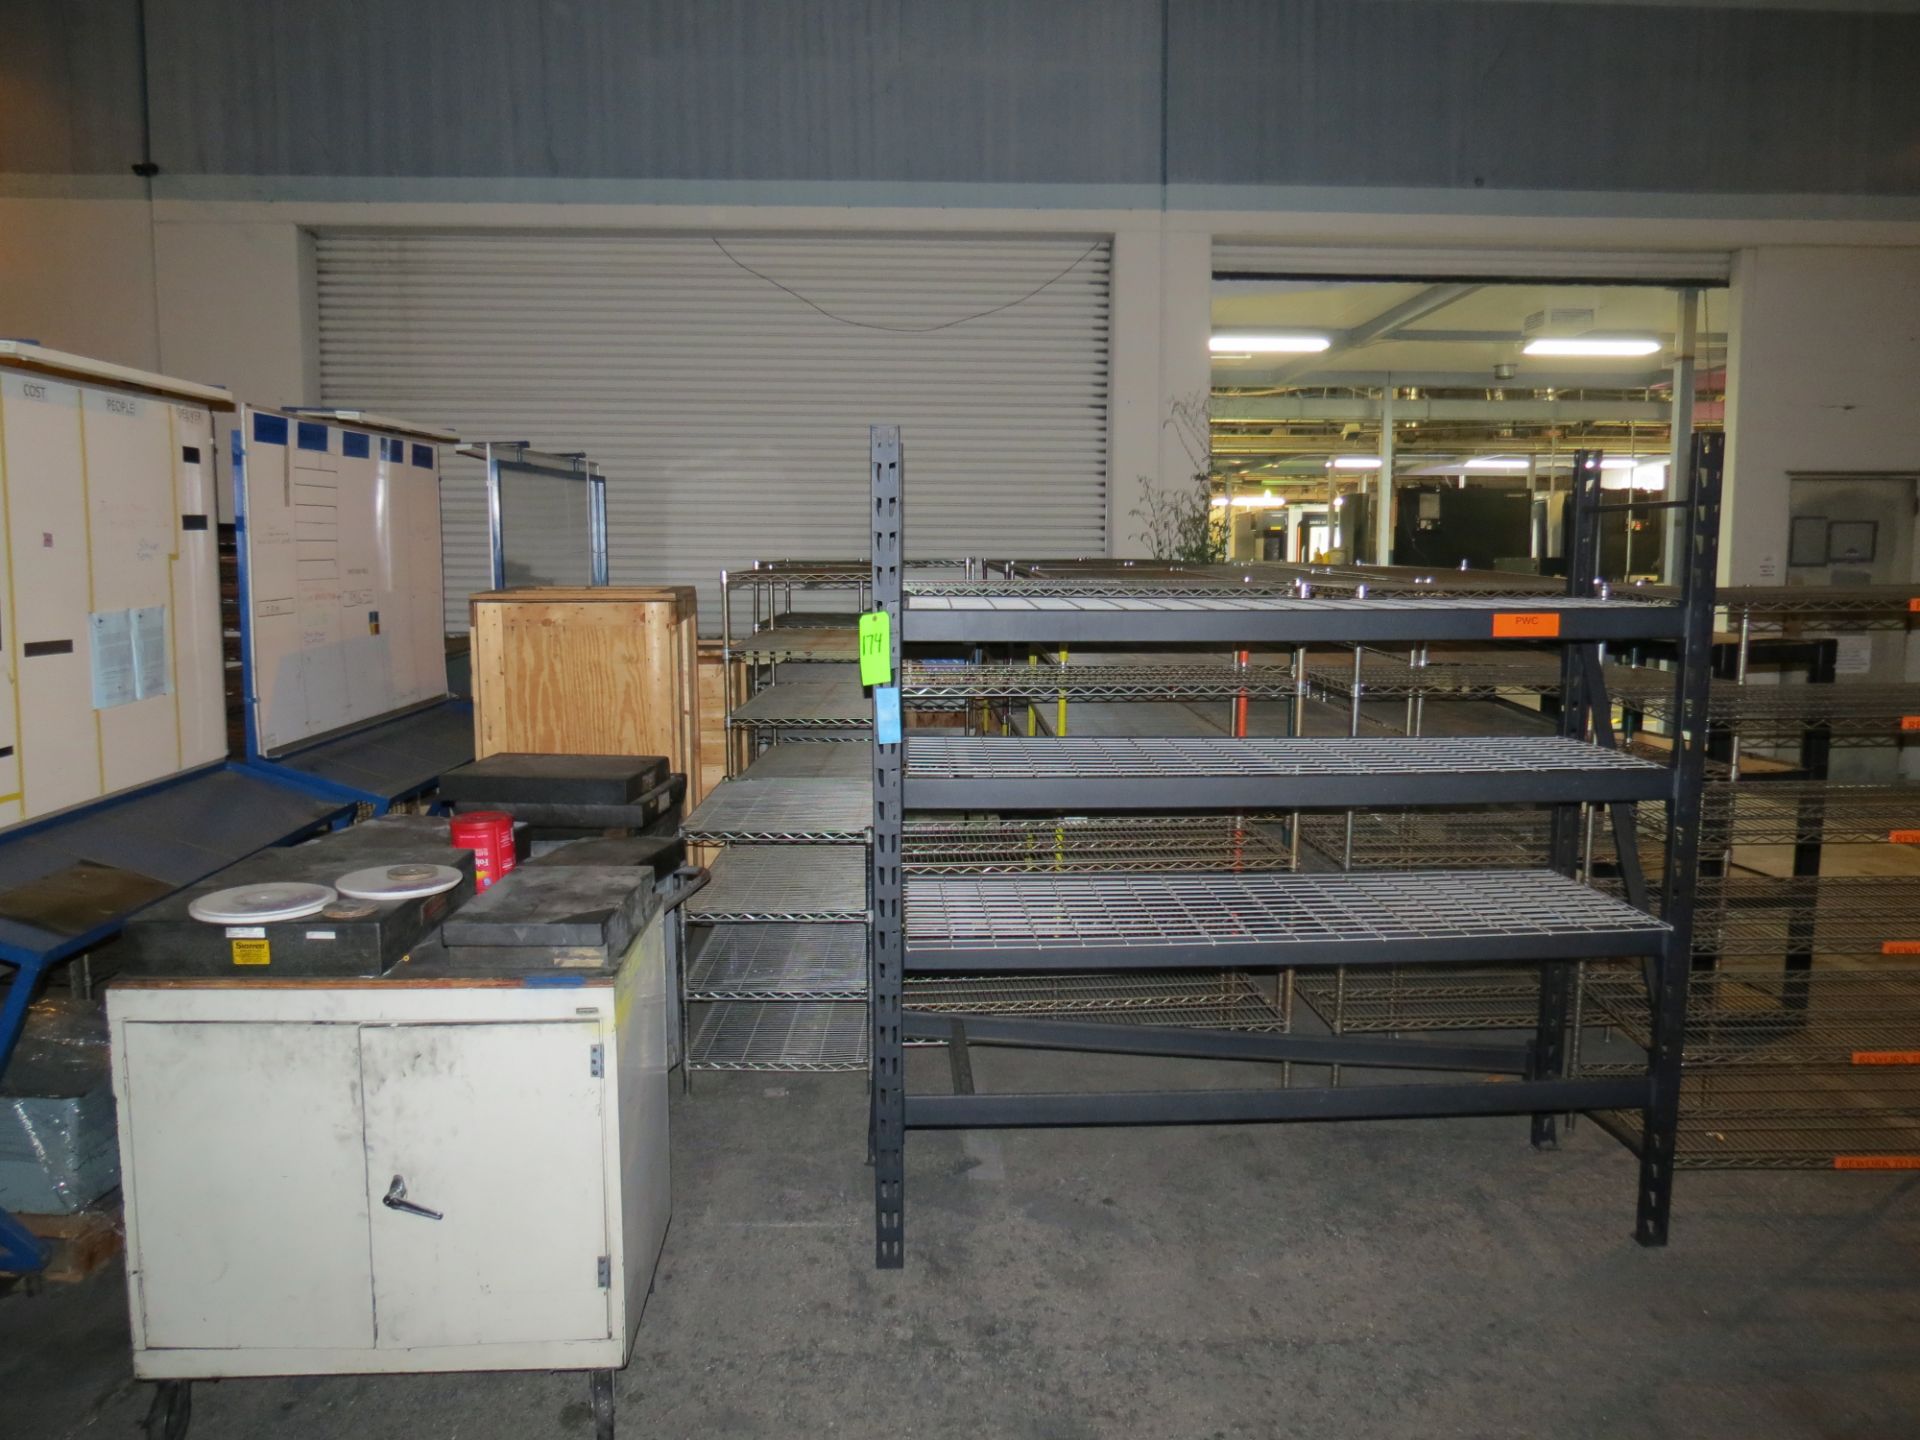 LOT OF ASSORTED CHROME WIRE RACKS, METAL SHELVES, CABINETS AND WHITE BOARDS, NO PRECISION SURFACE